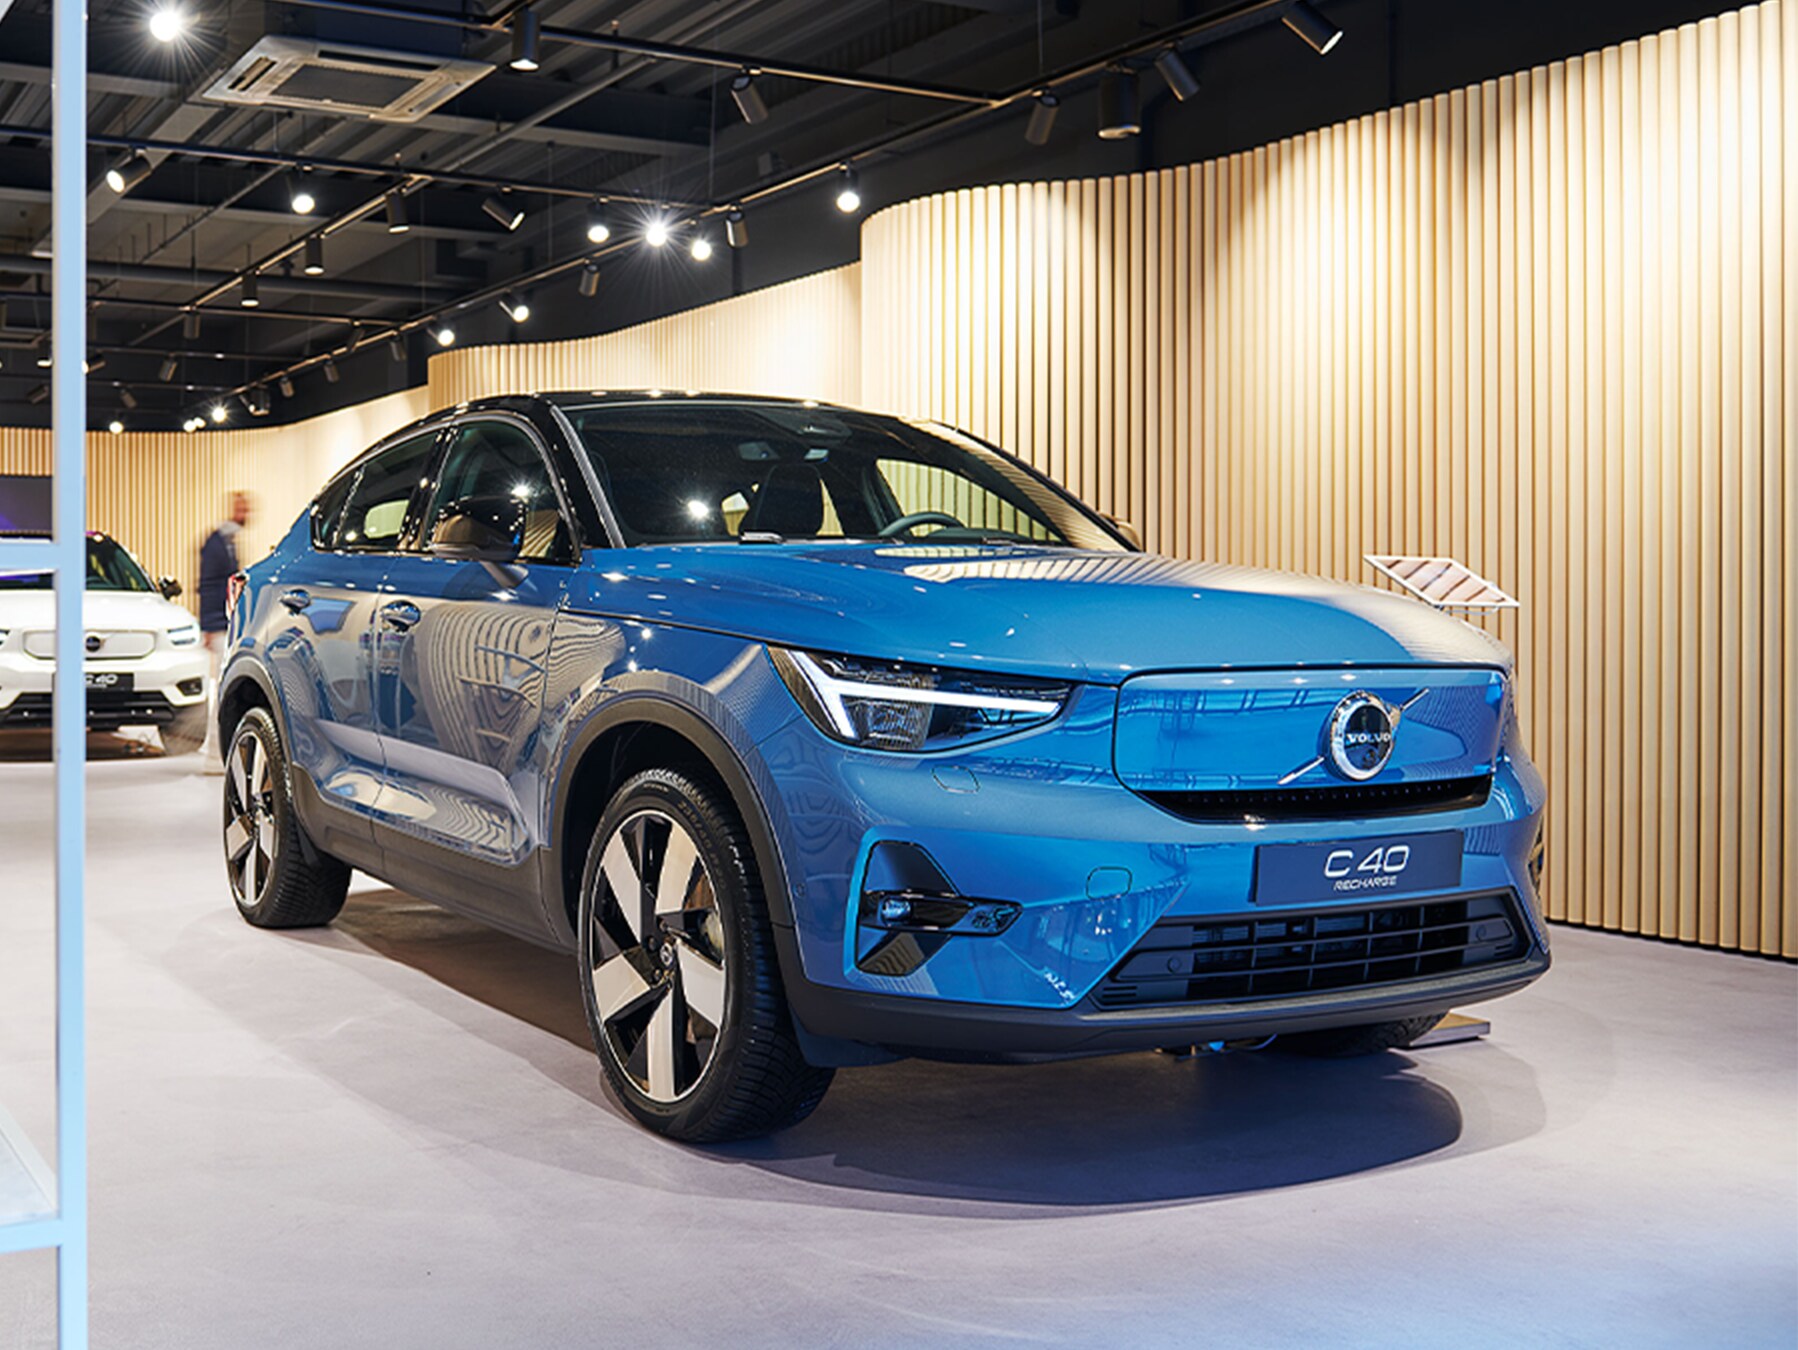 The new pure electric Volvo C40 